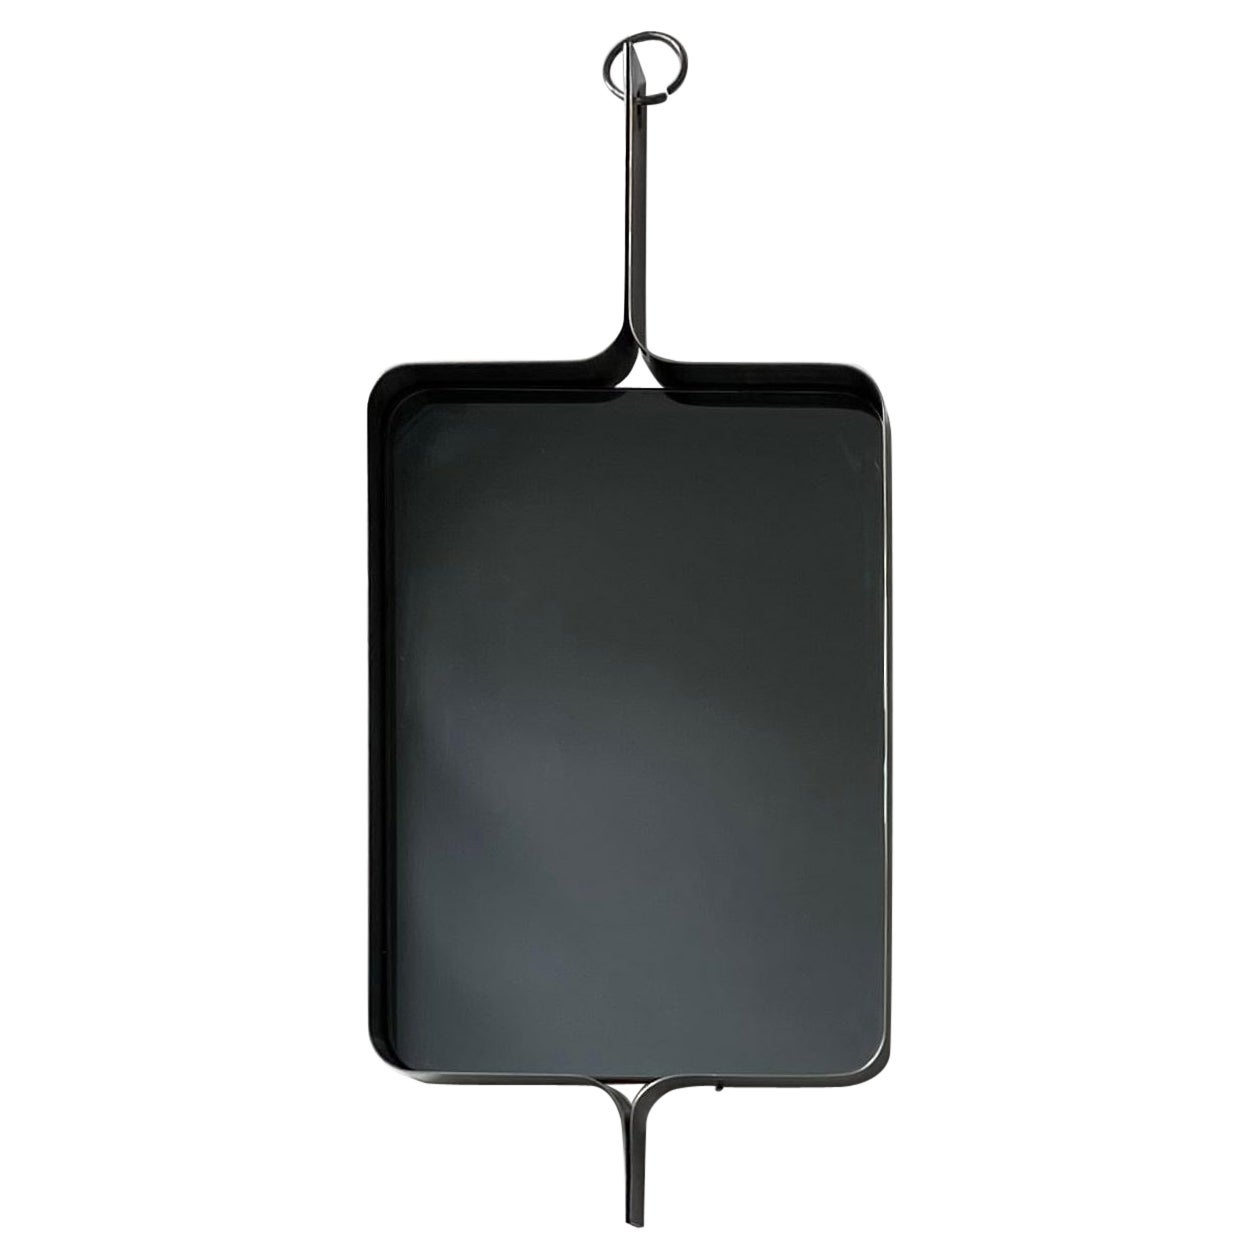 Xavier Féal Stainless Steel Smoked Mirror For Sale